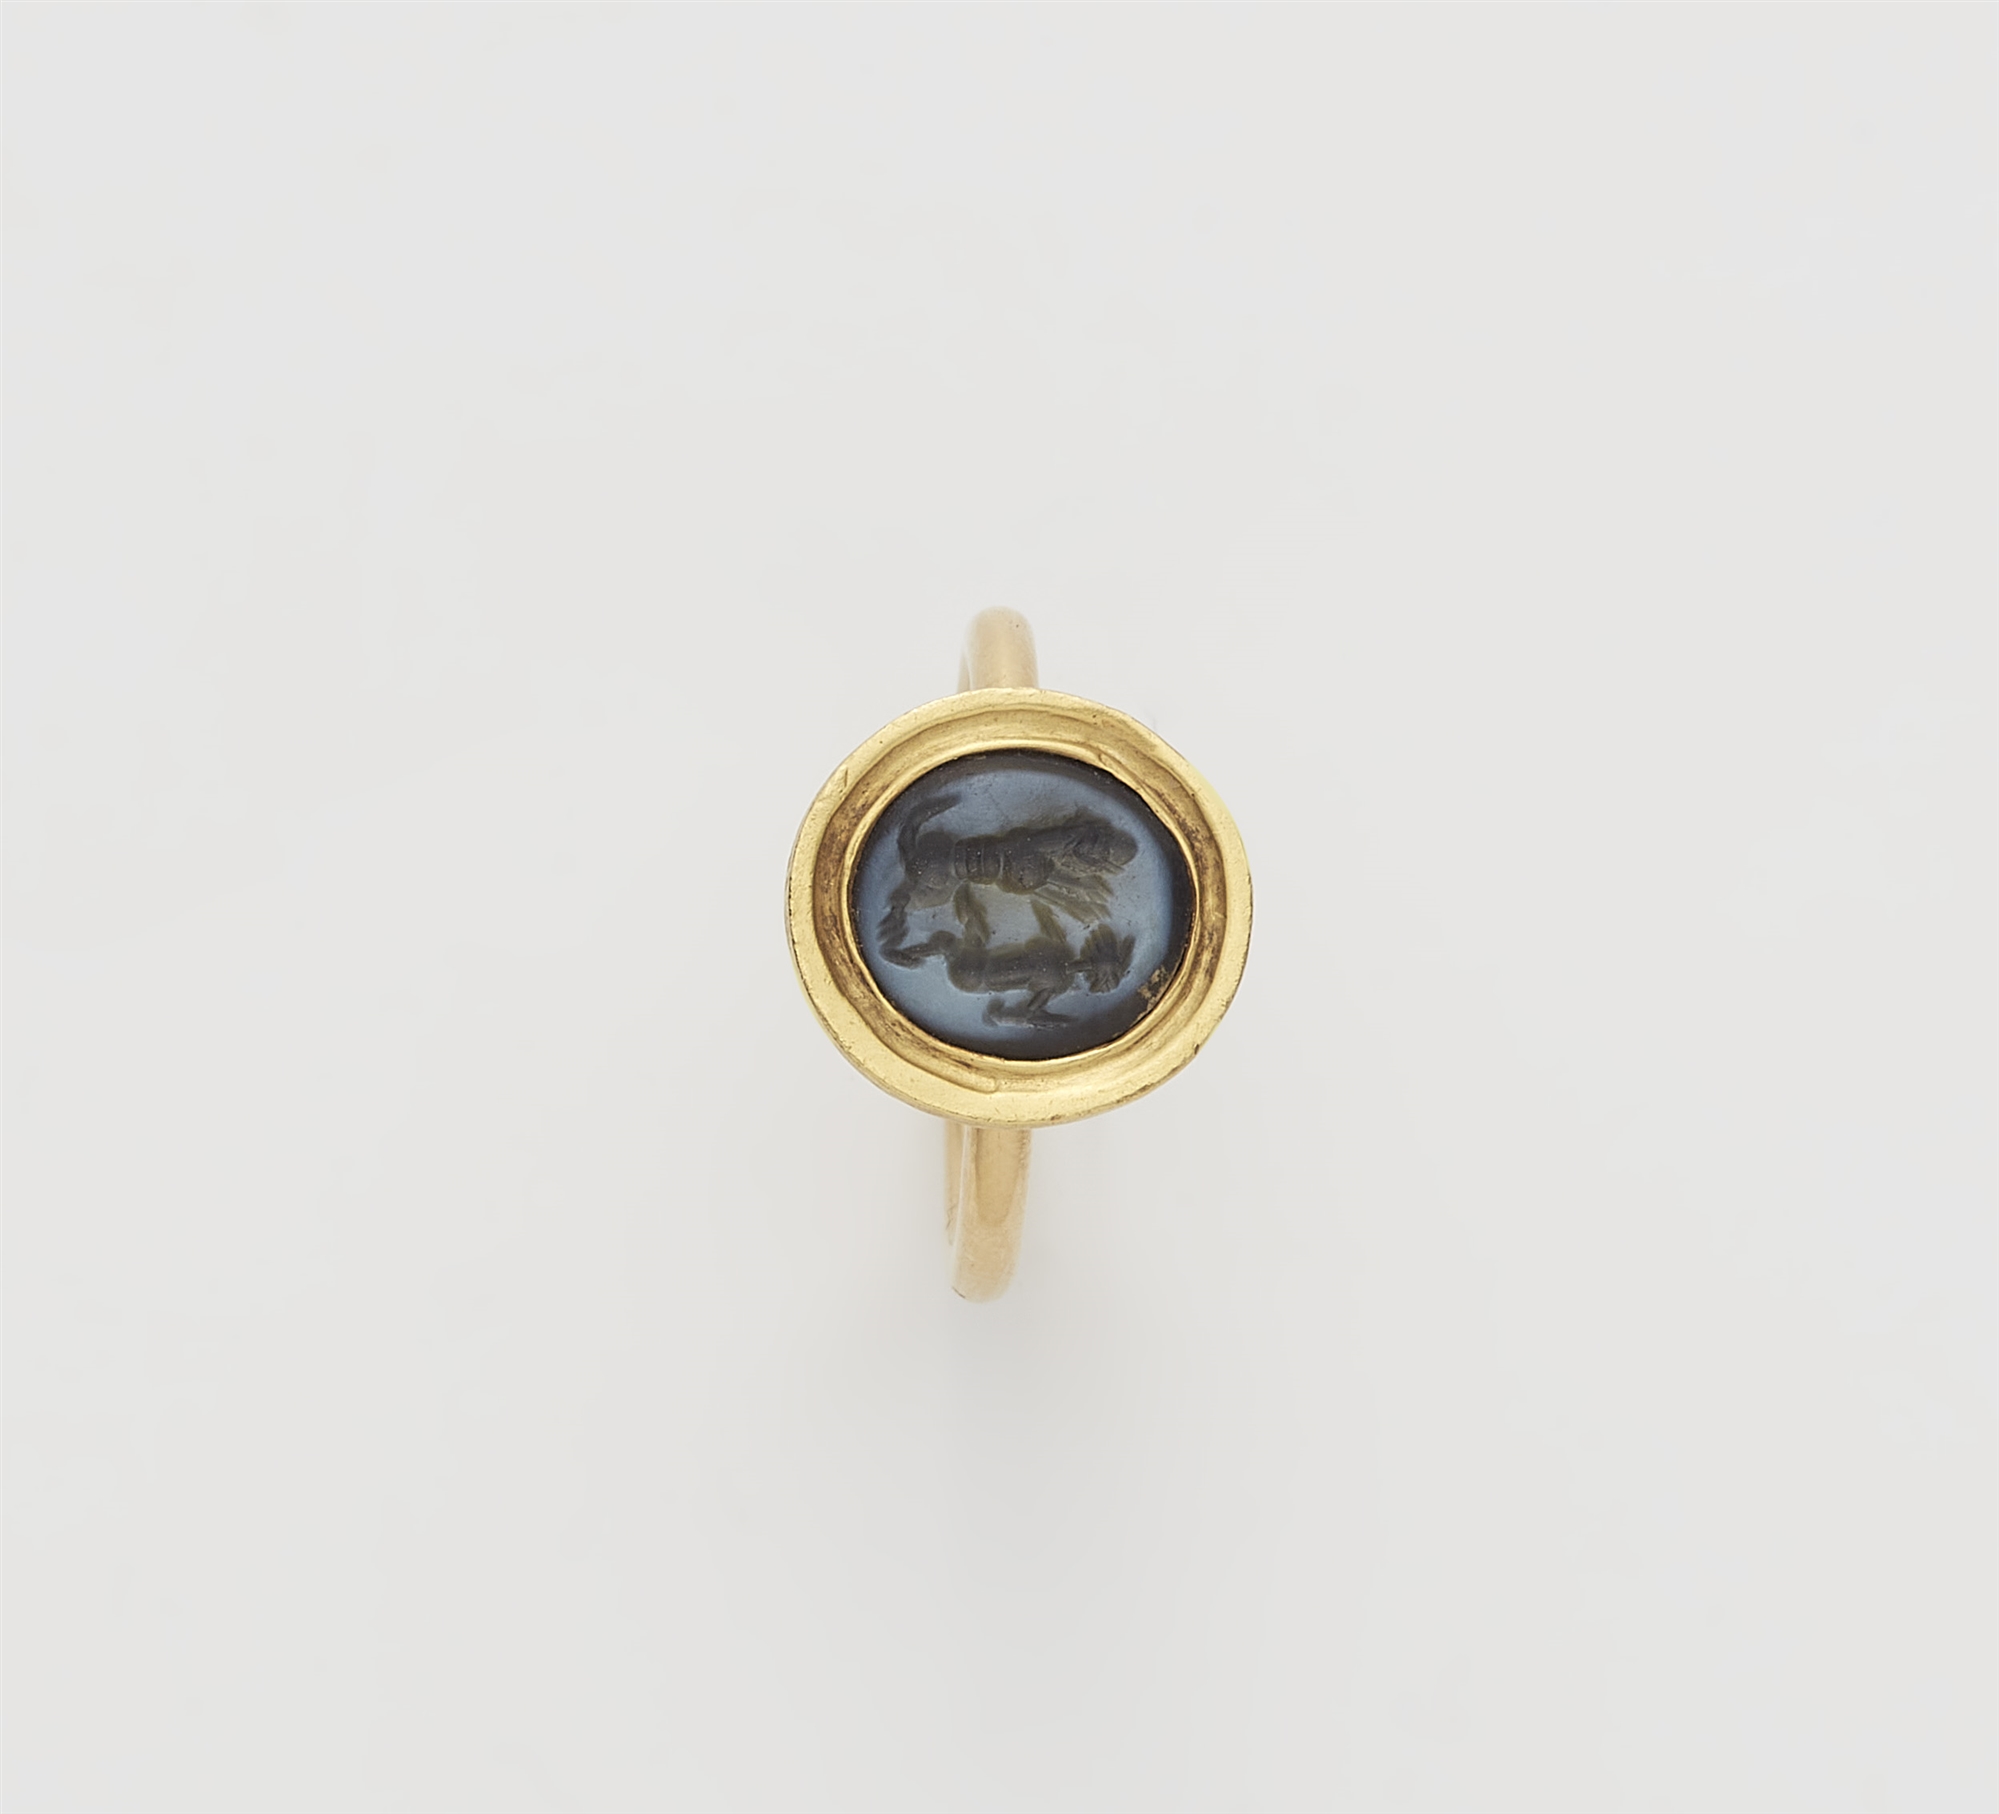 An 18k gold ring with an ancient Sassanian nicolo intaglio depicting a lion fighting with a hoofed a